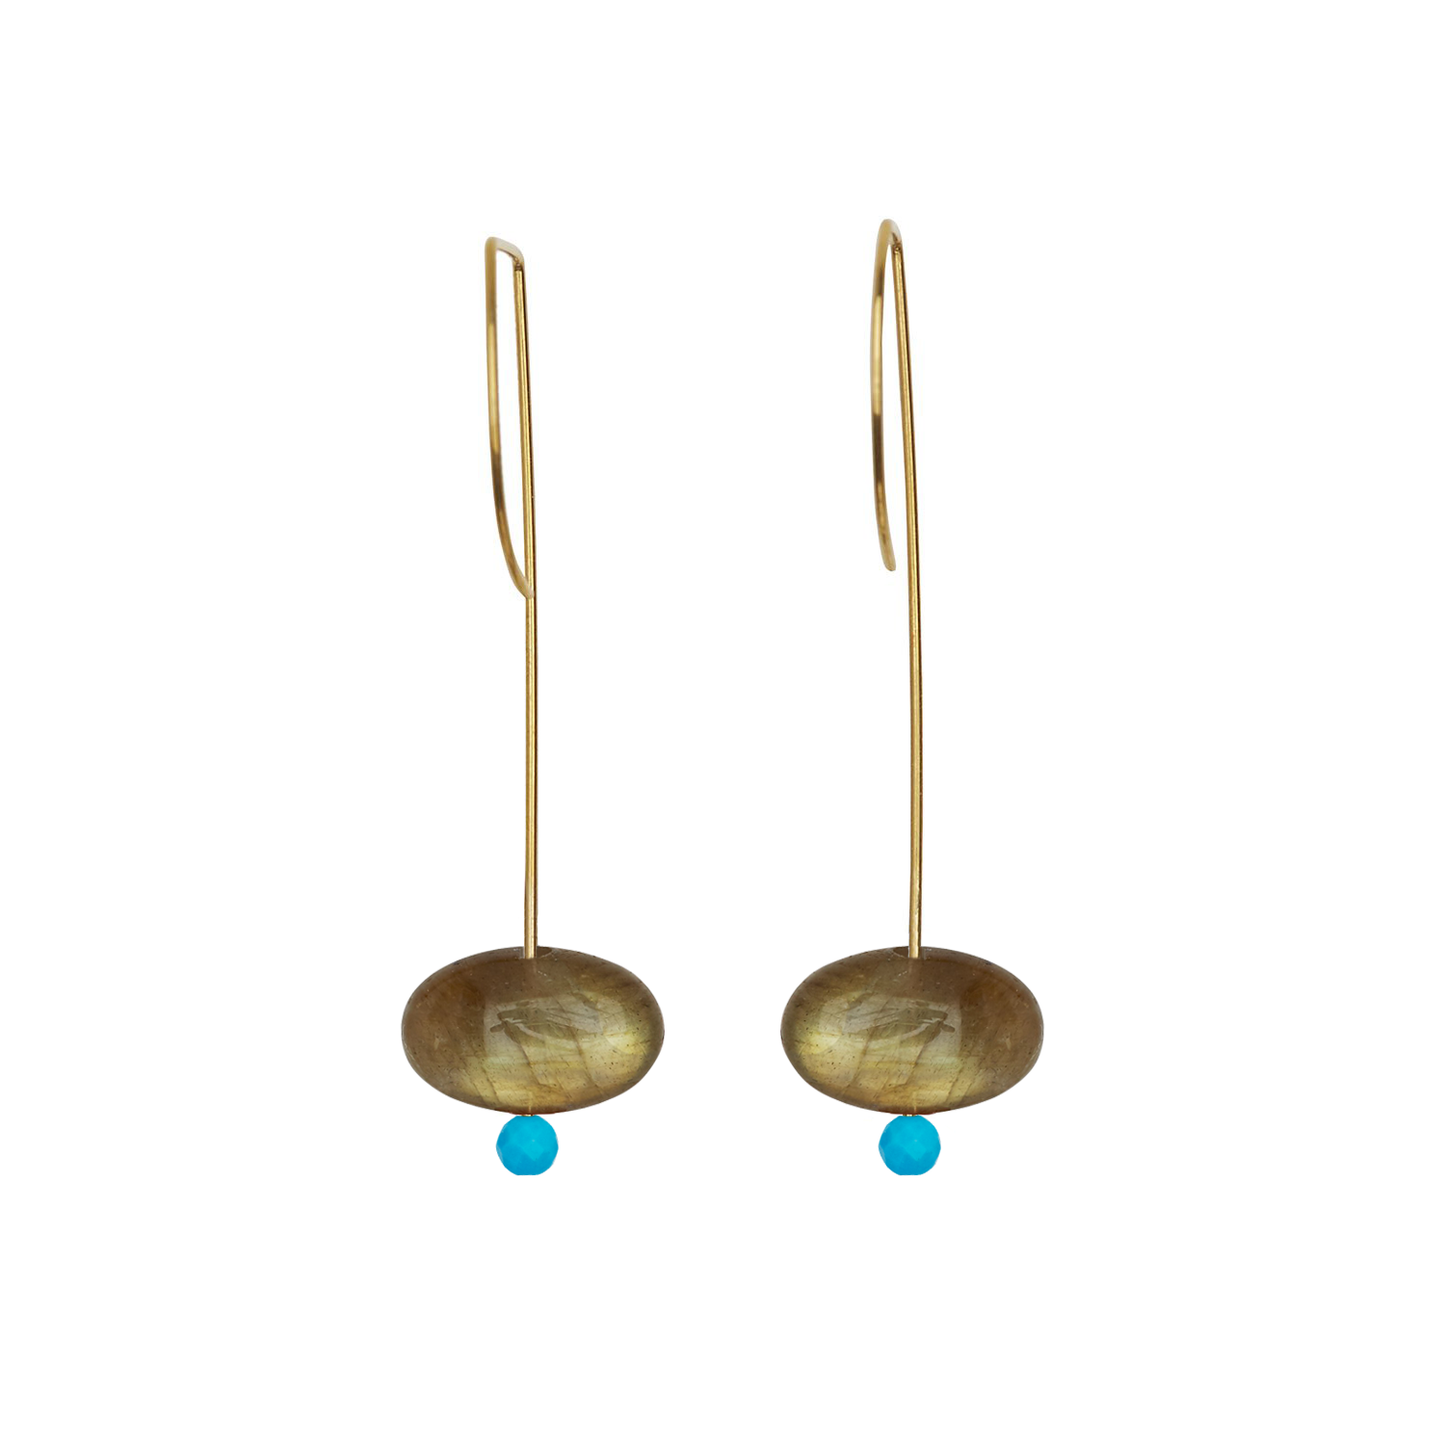 Straight Drop Earrings with Labradorite and Round Beads